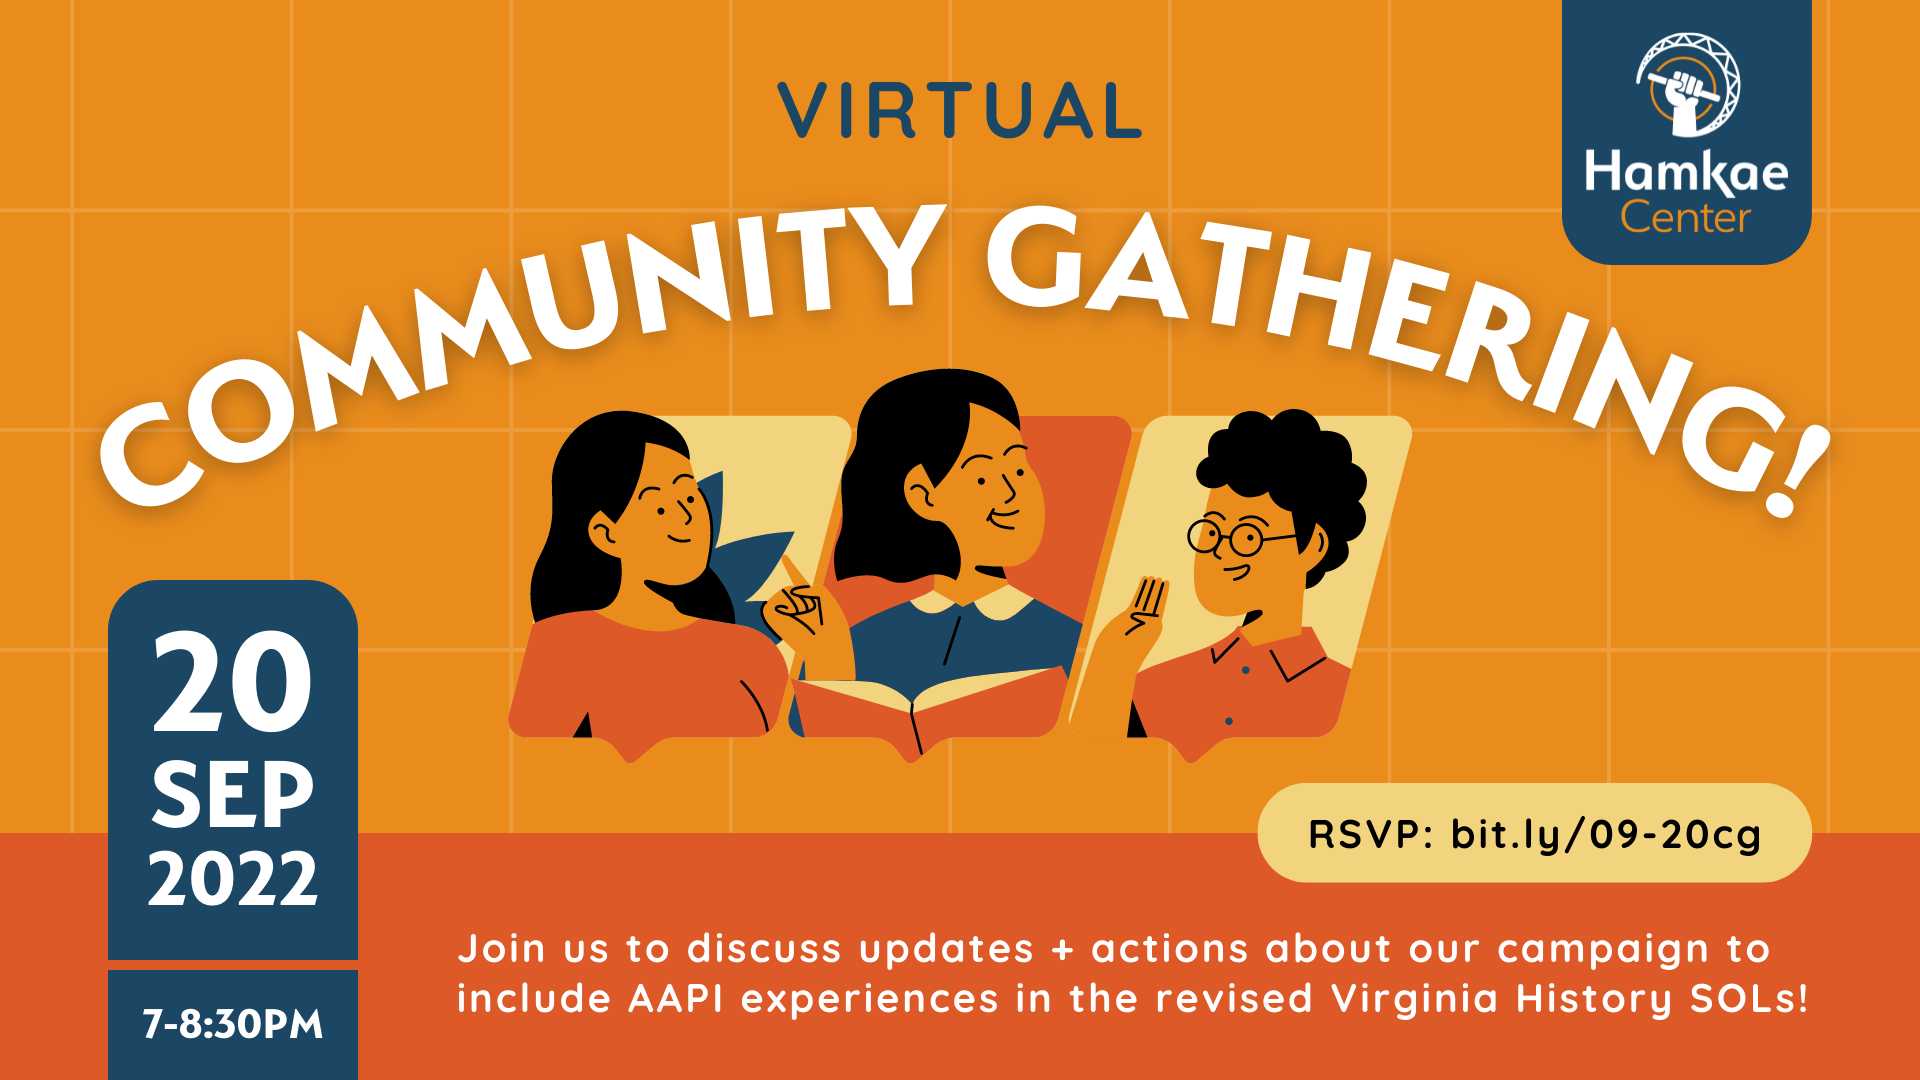 Virtual Community Gathering! 20 Sep 2022; 7-8:30pm EST. Join Hamkae Center to discuss updates + actions about our campaign to include AAPI experiences in the revised Virginia History SOLs! RSVP: bit.ly/09-20cg